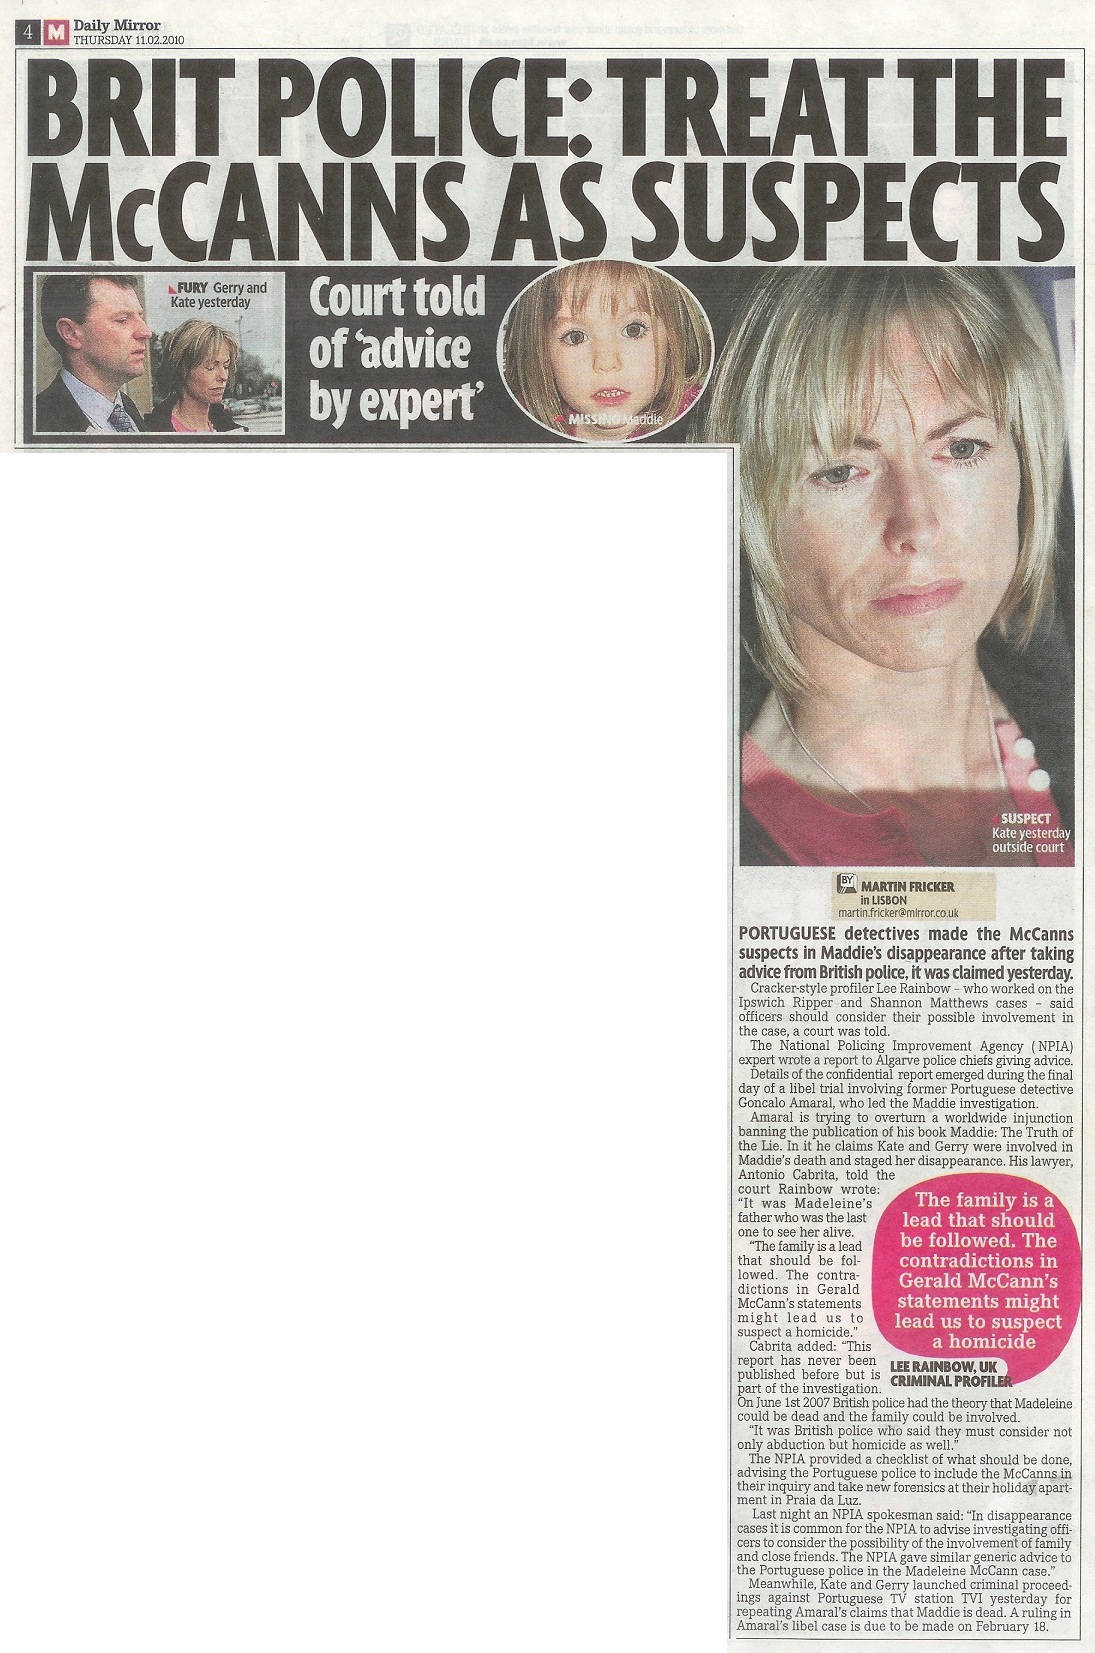 Daily Mirror (paper edition), 11 February 2010